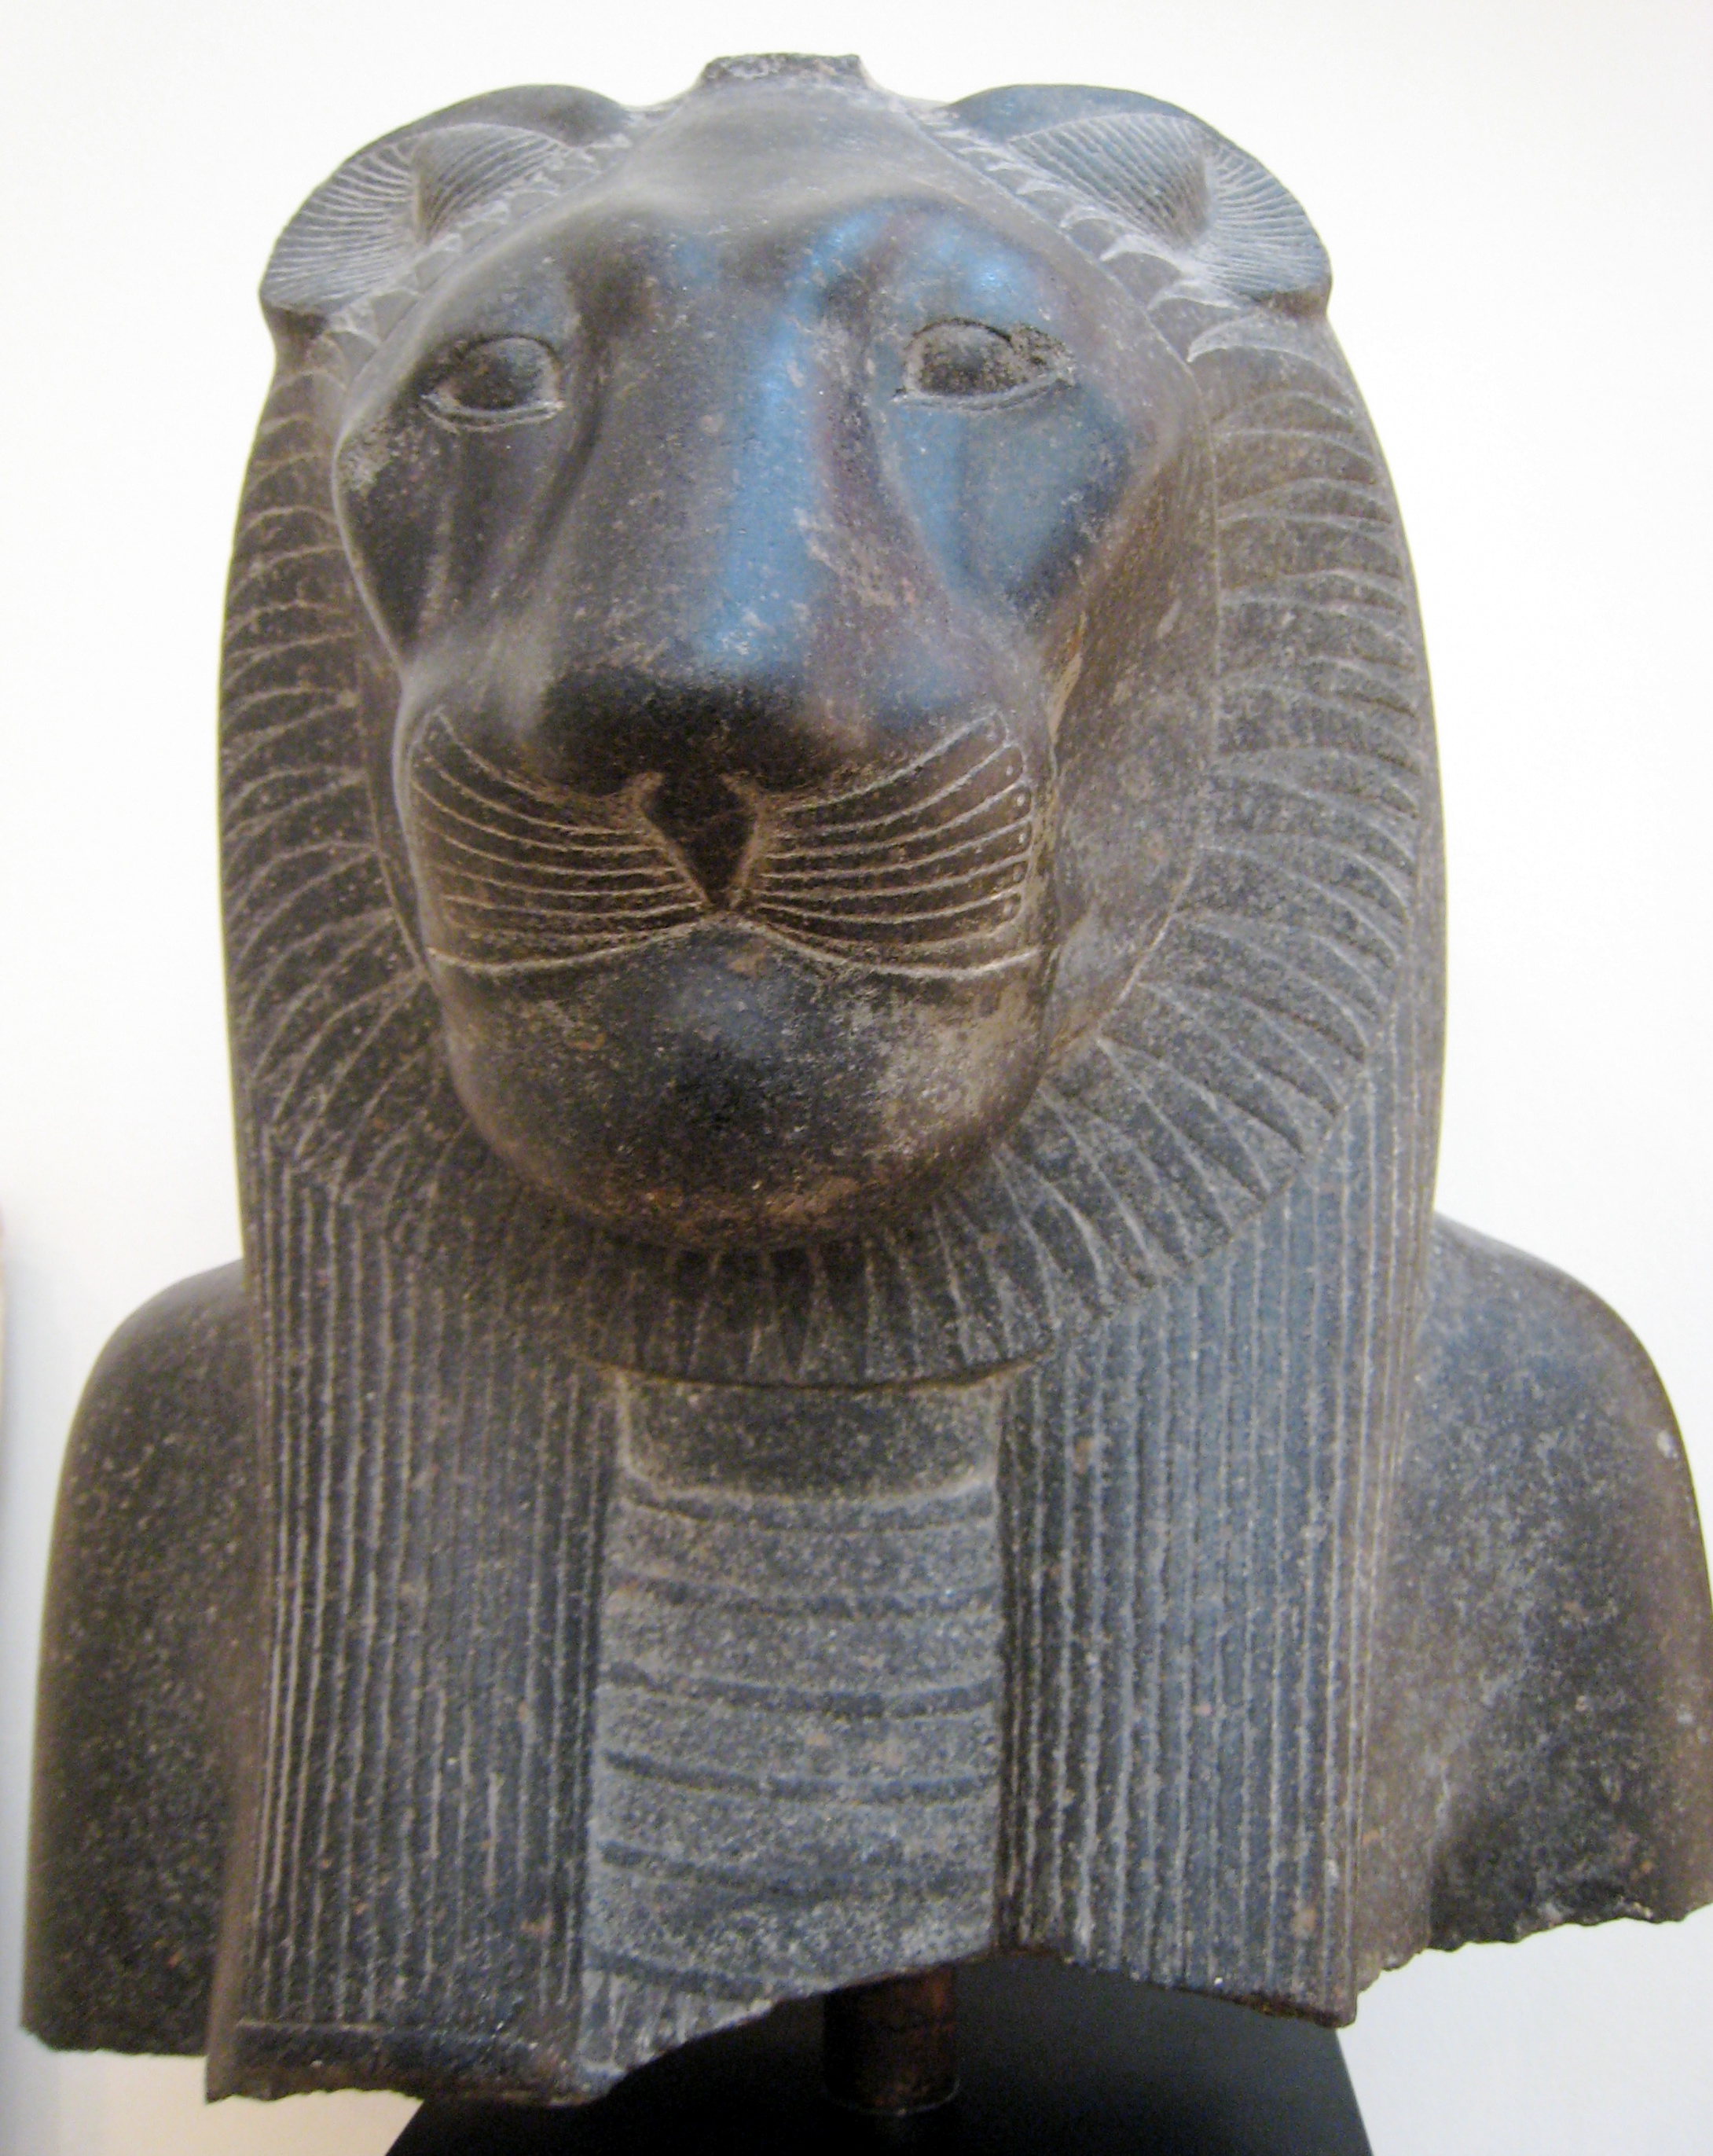 Statue of Sekhmet from the temple of Mut. granite